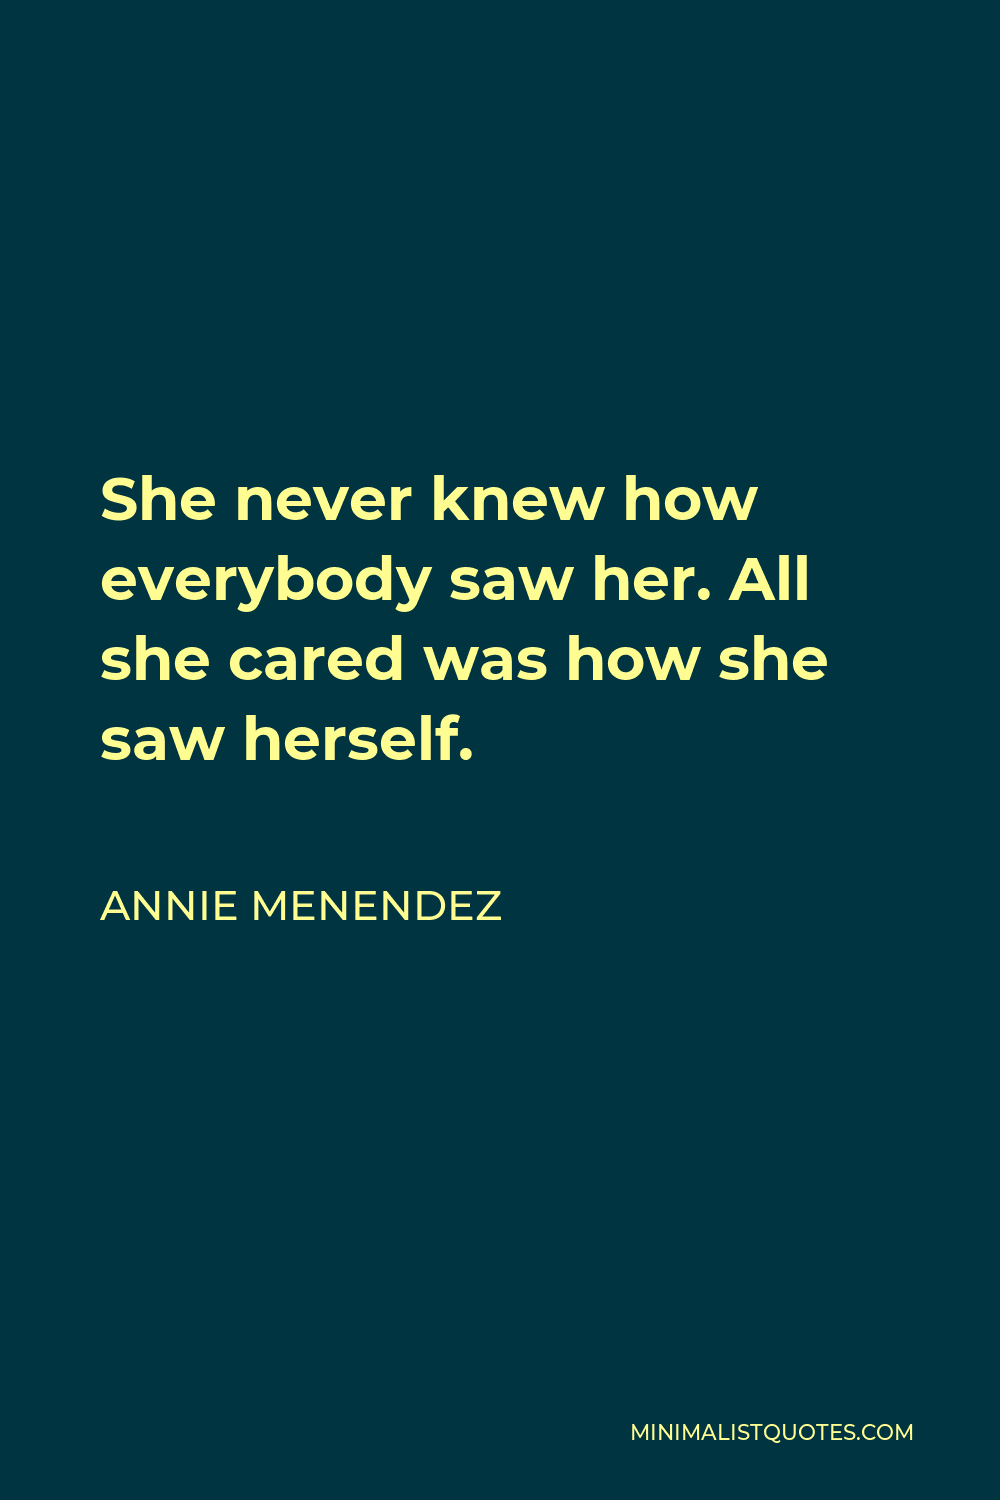 Annie Menendez Quote - She never knew how everybody saw her. All she cared was how she saw herself.